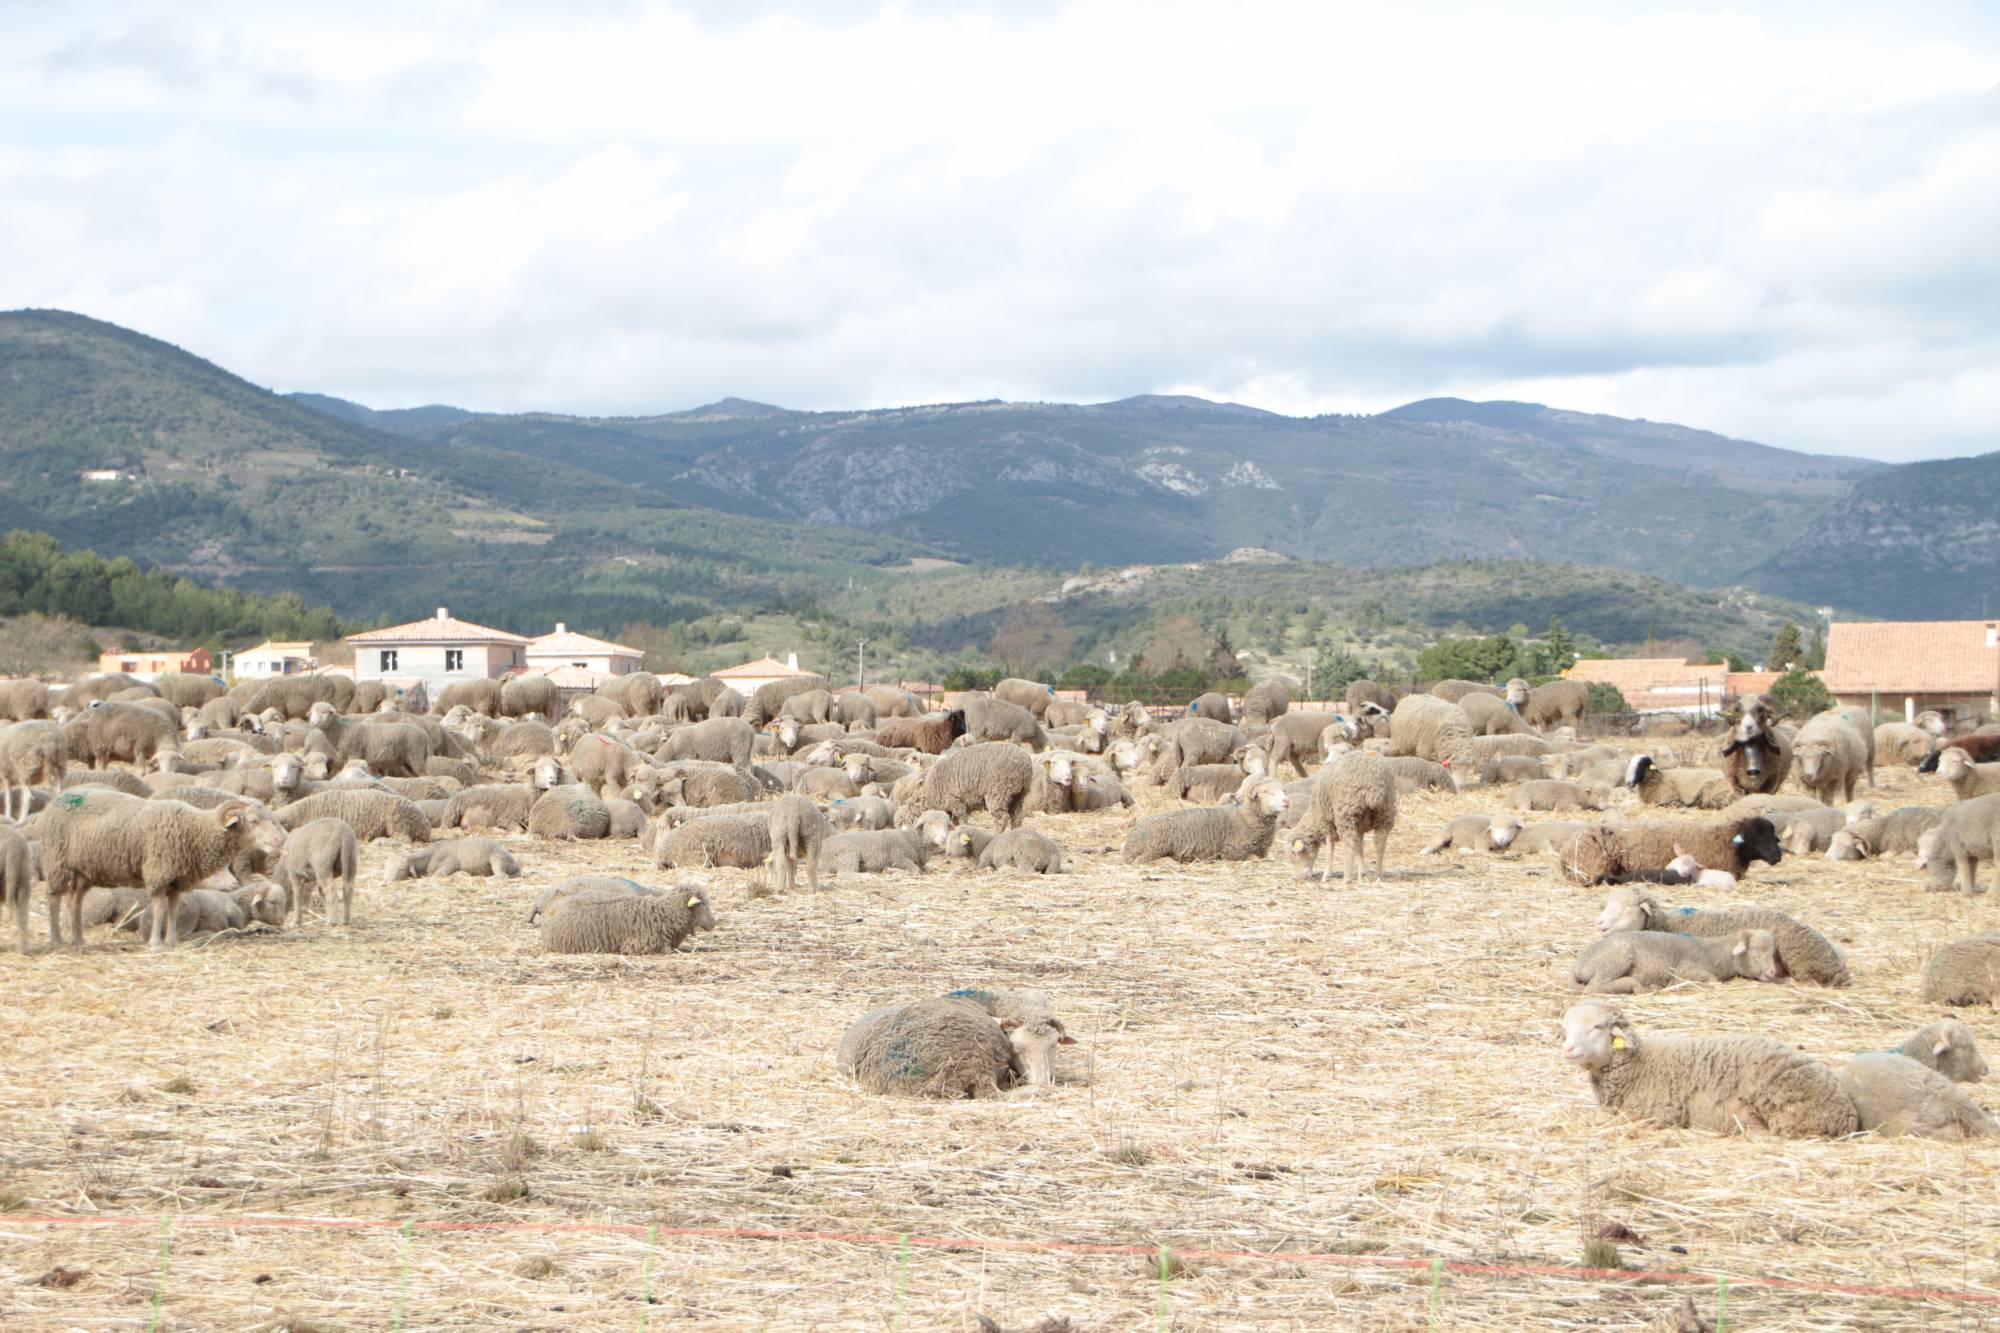 Sheep in a peri-urban area in the foothills of the Minervois, Aude